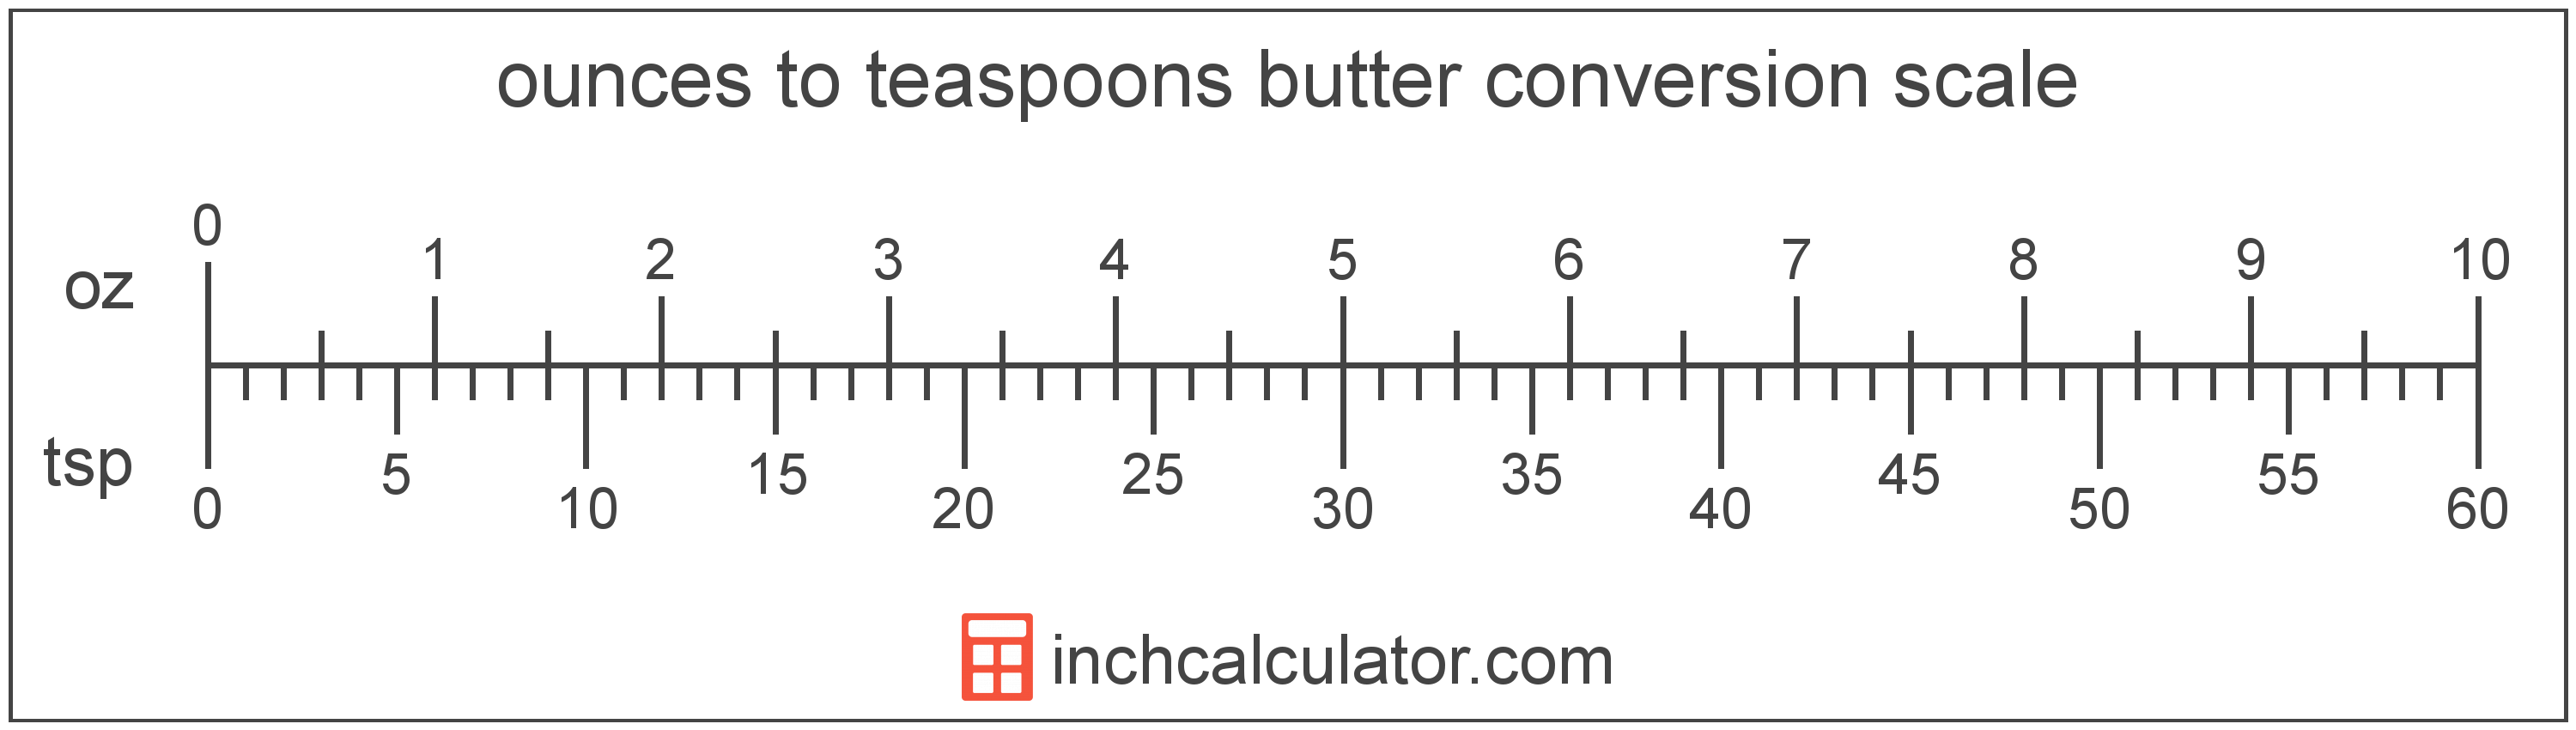 conversion scale showing ounces and equivalent teaspoons butter values